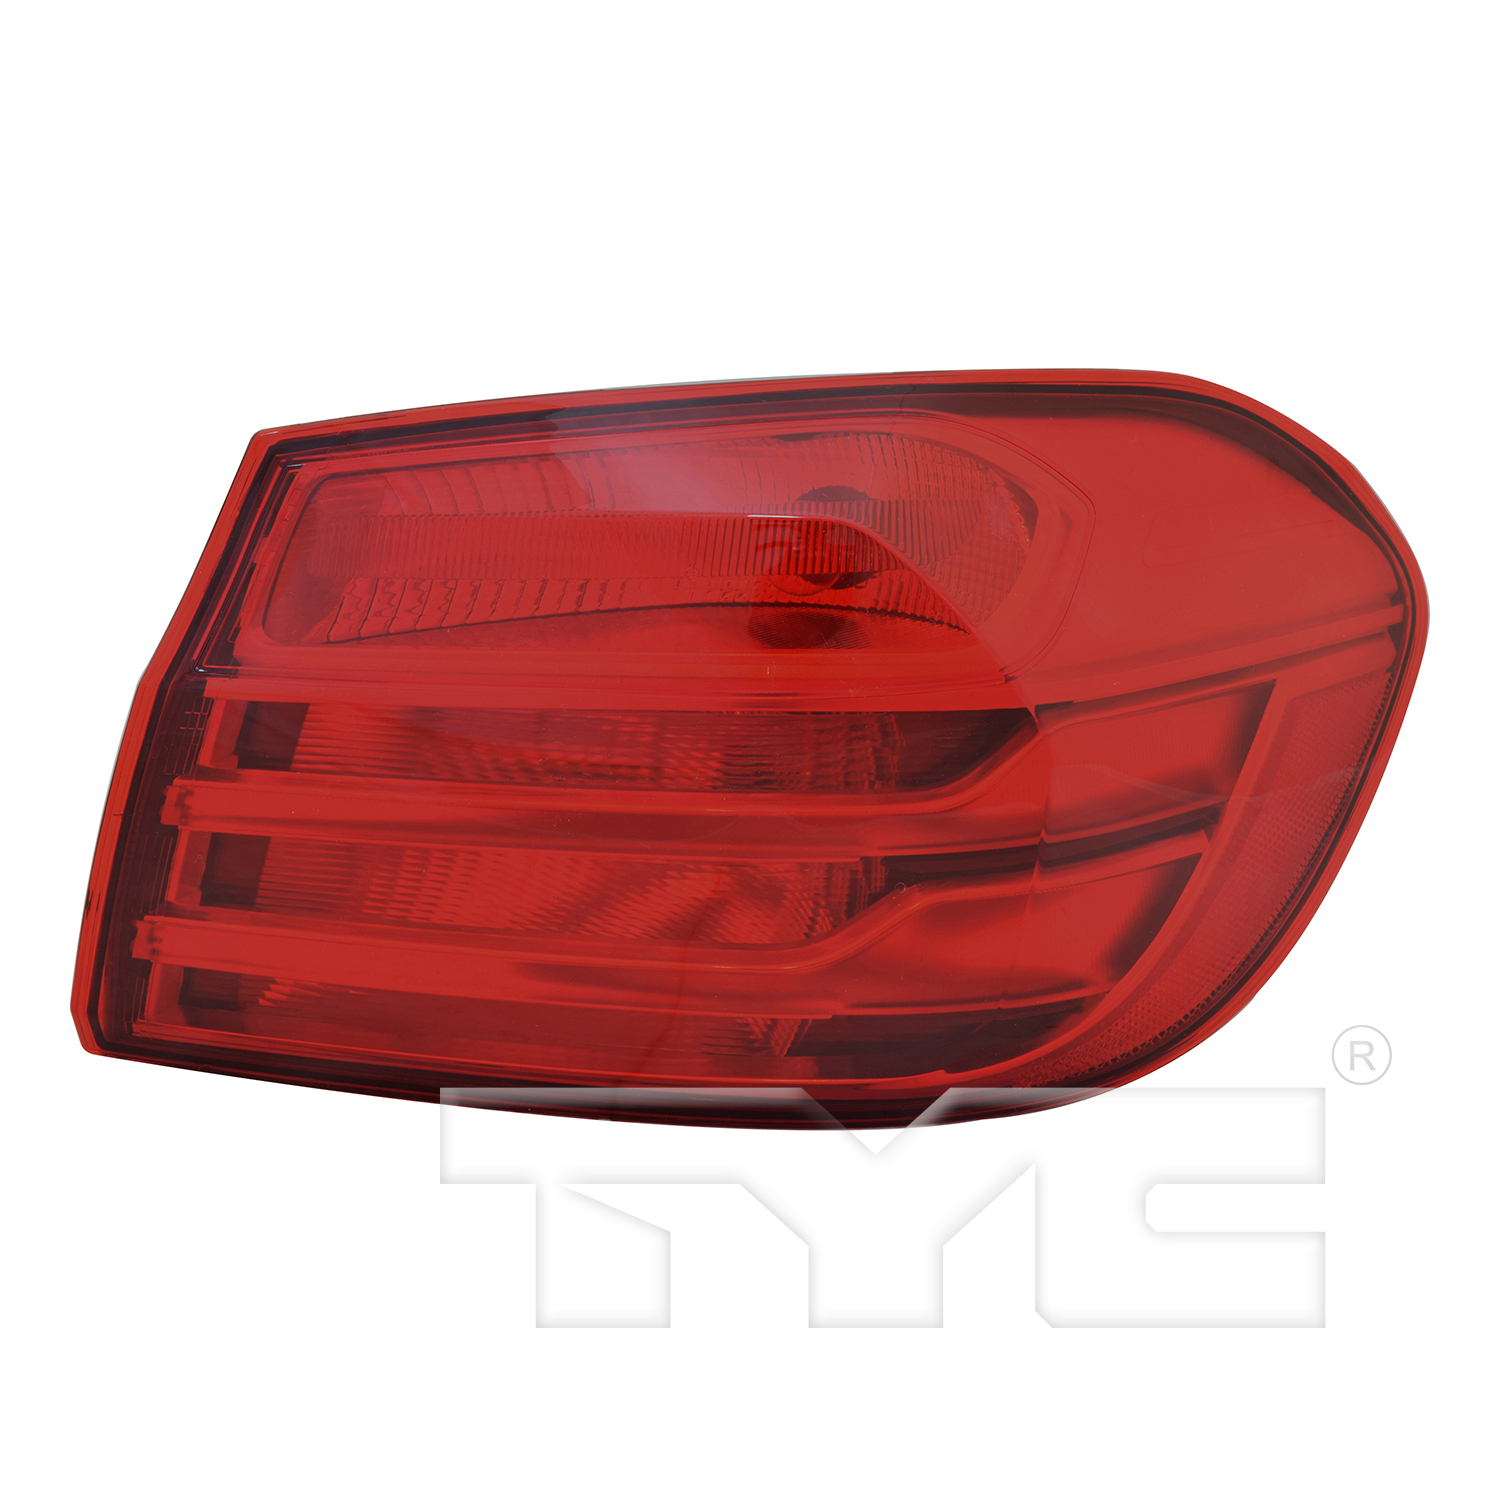 Aftermarket TAILLIGHTS for BMW - 440I GRAN COUPE, 440i Gran Coupe,17-17,RT Taillamp assy outer